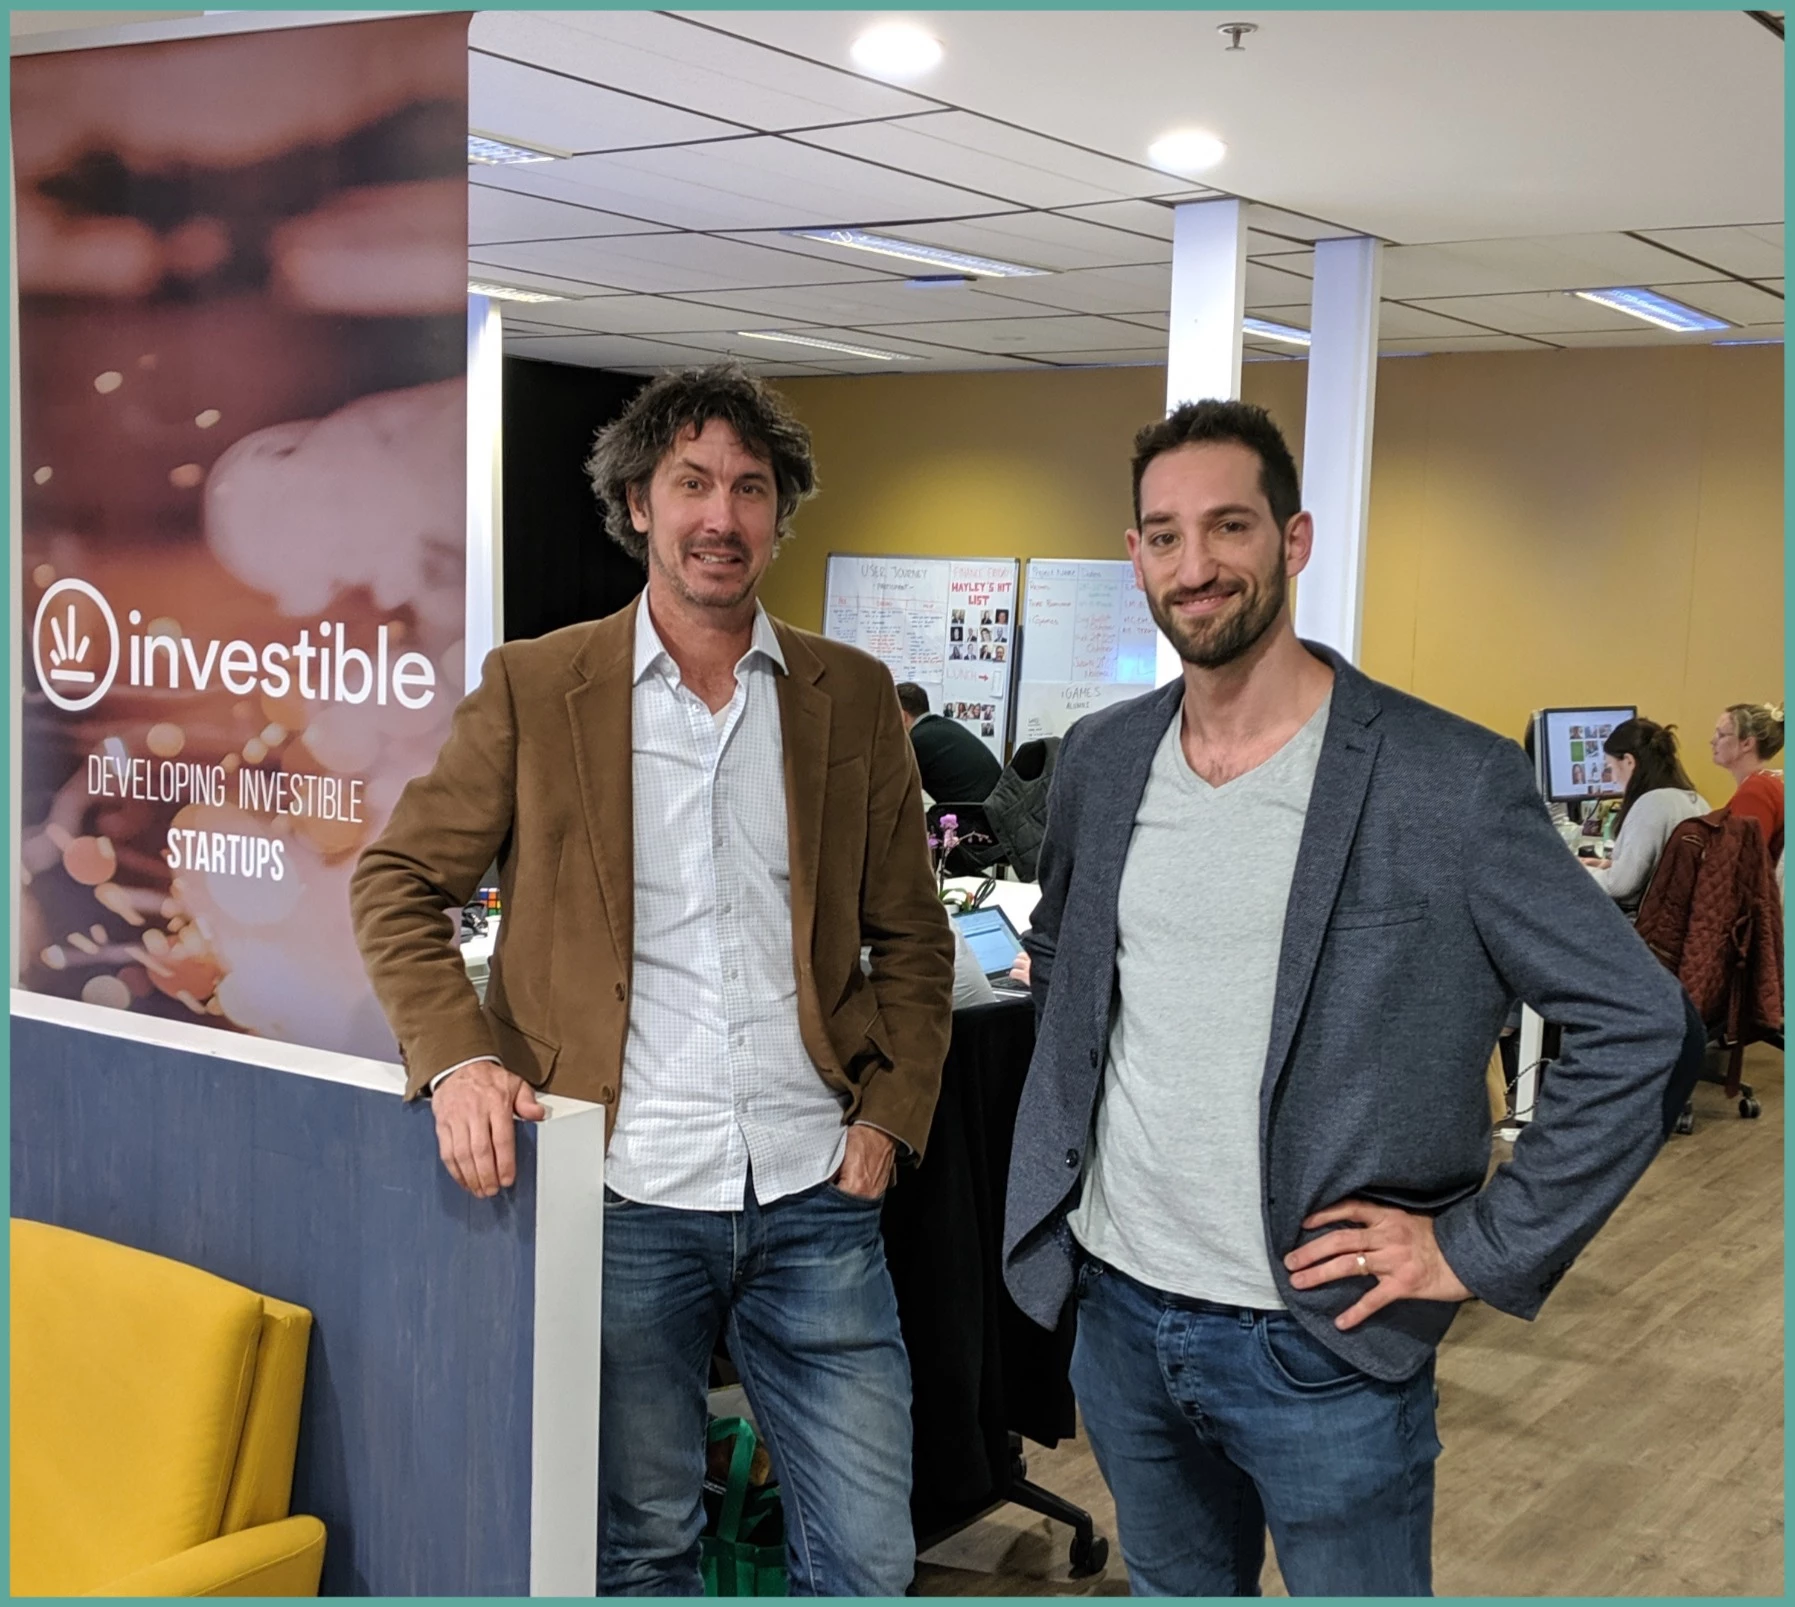 Interview with Creel Price, CEO of Investible